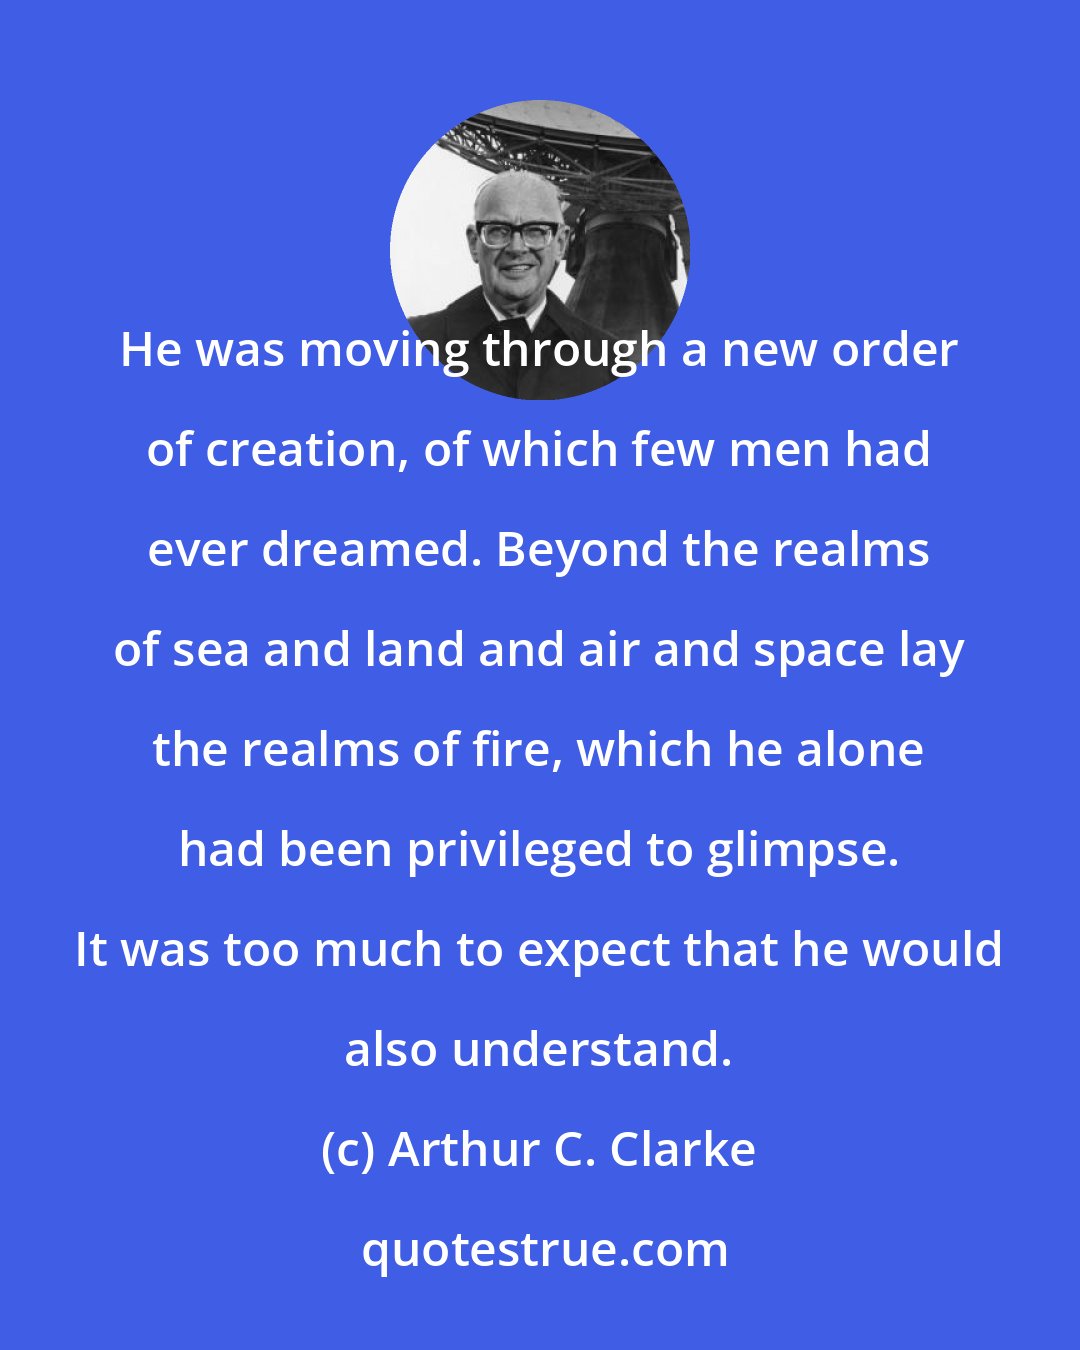 Arthur C. Clarke: He was moving through a new order of creation, of which few men had ever dreamed. Beyond the realms of sea and land and air and space lay the realms of fire, which he alone had been privileged to glimpse. It was too much to expect that he would also understand.